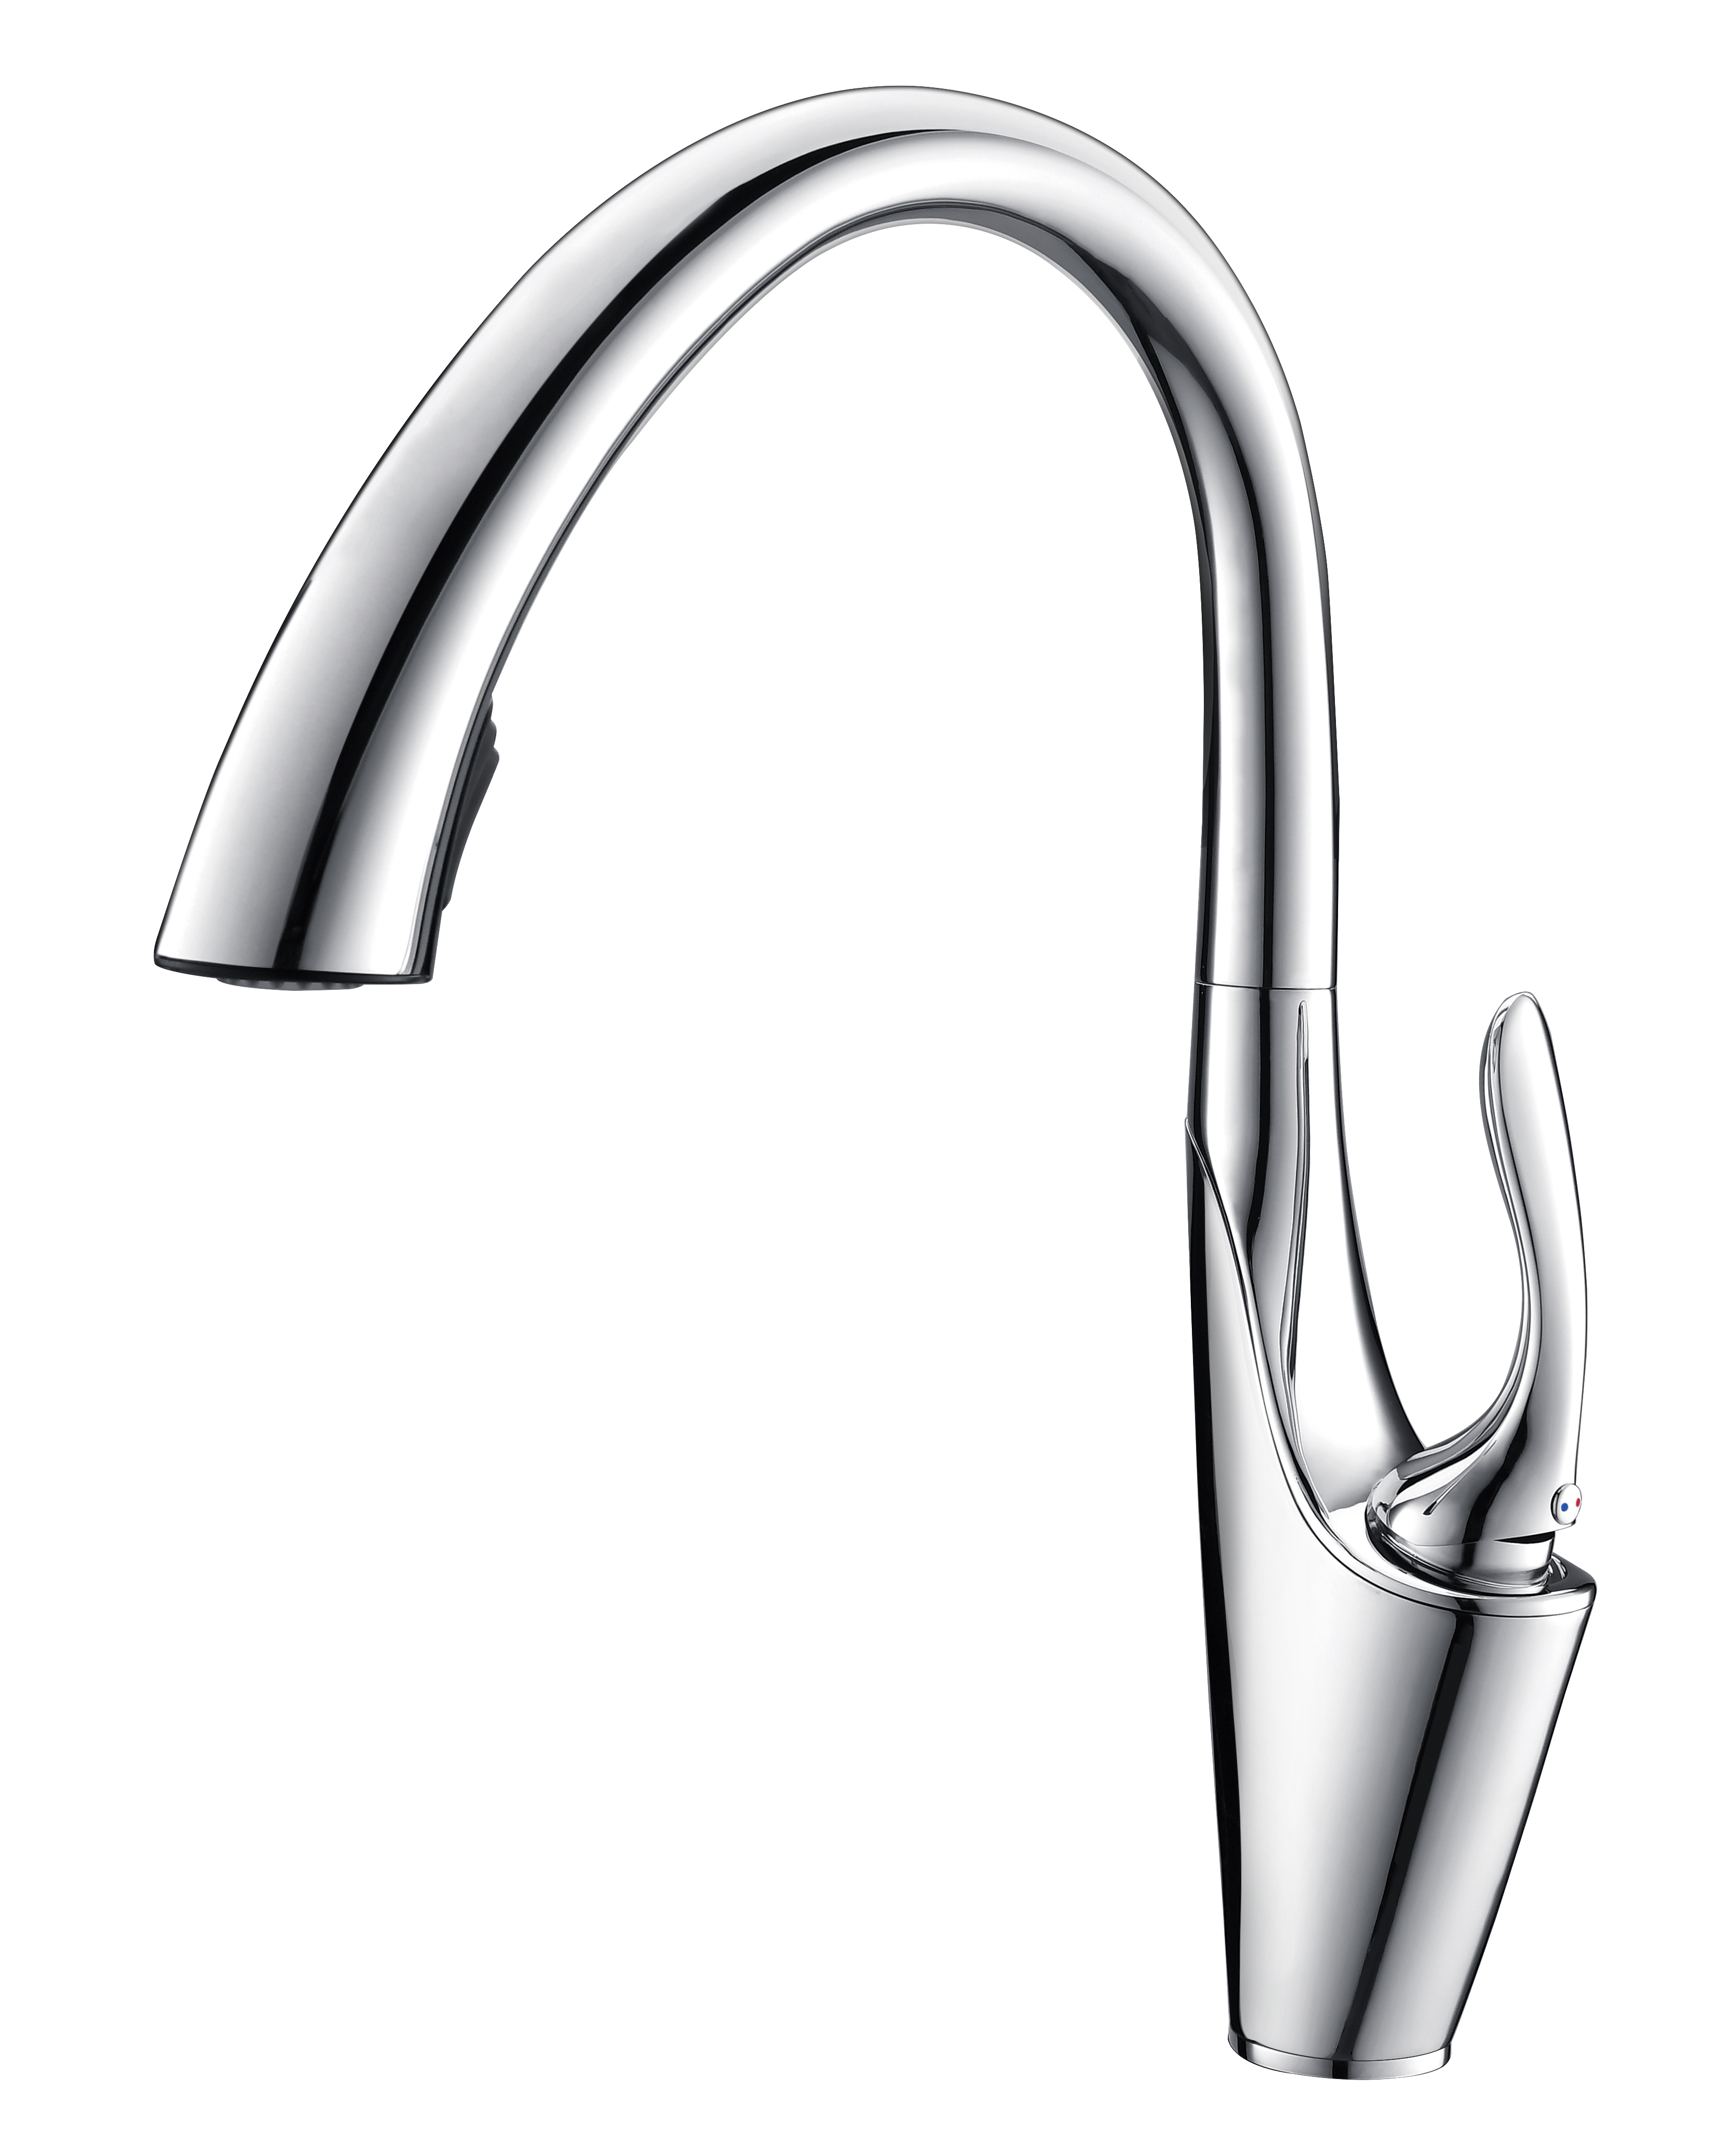 A01 Luxury American Commercial Modern Water Mixer Tap Chrome Zinc Pull Out Kitchen Faucet